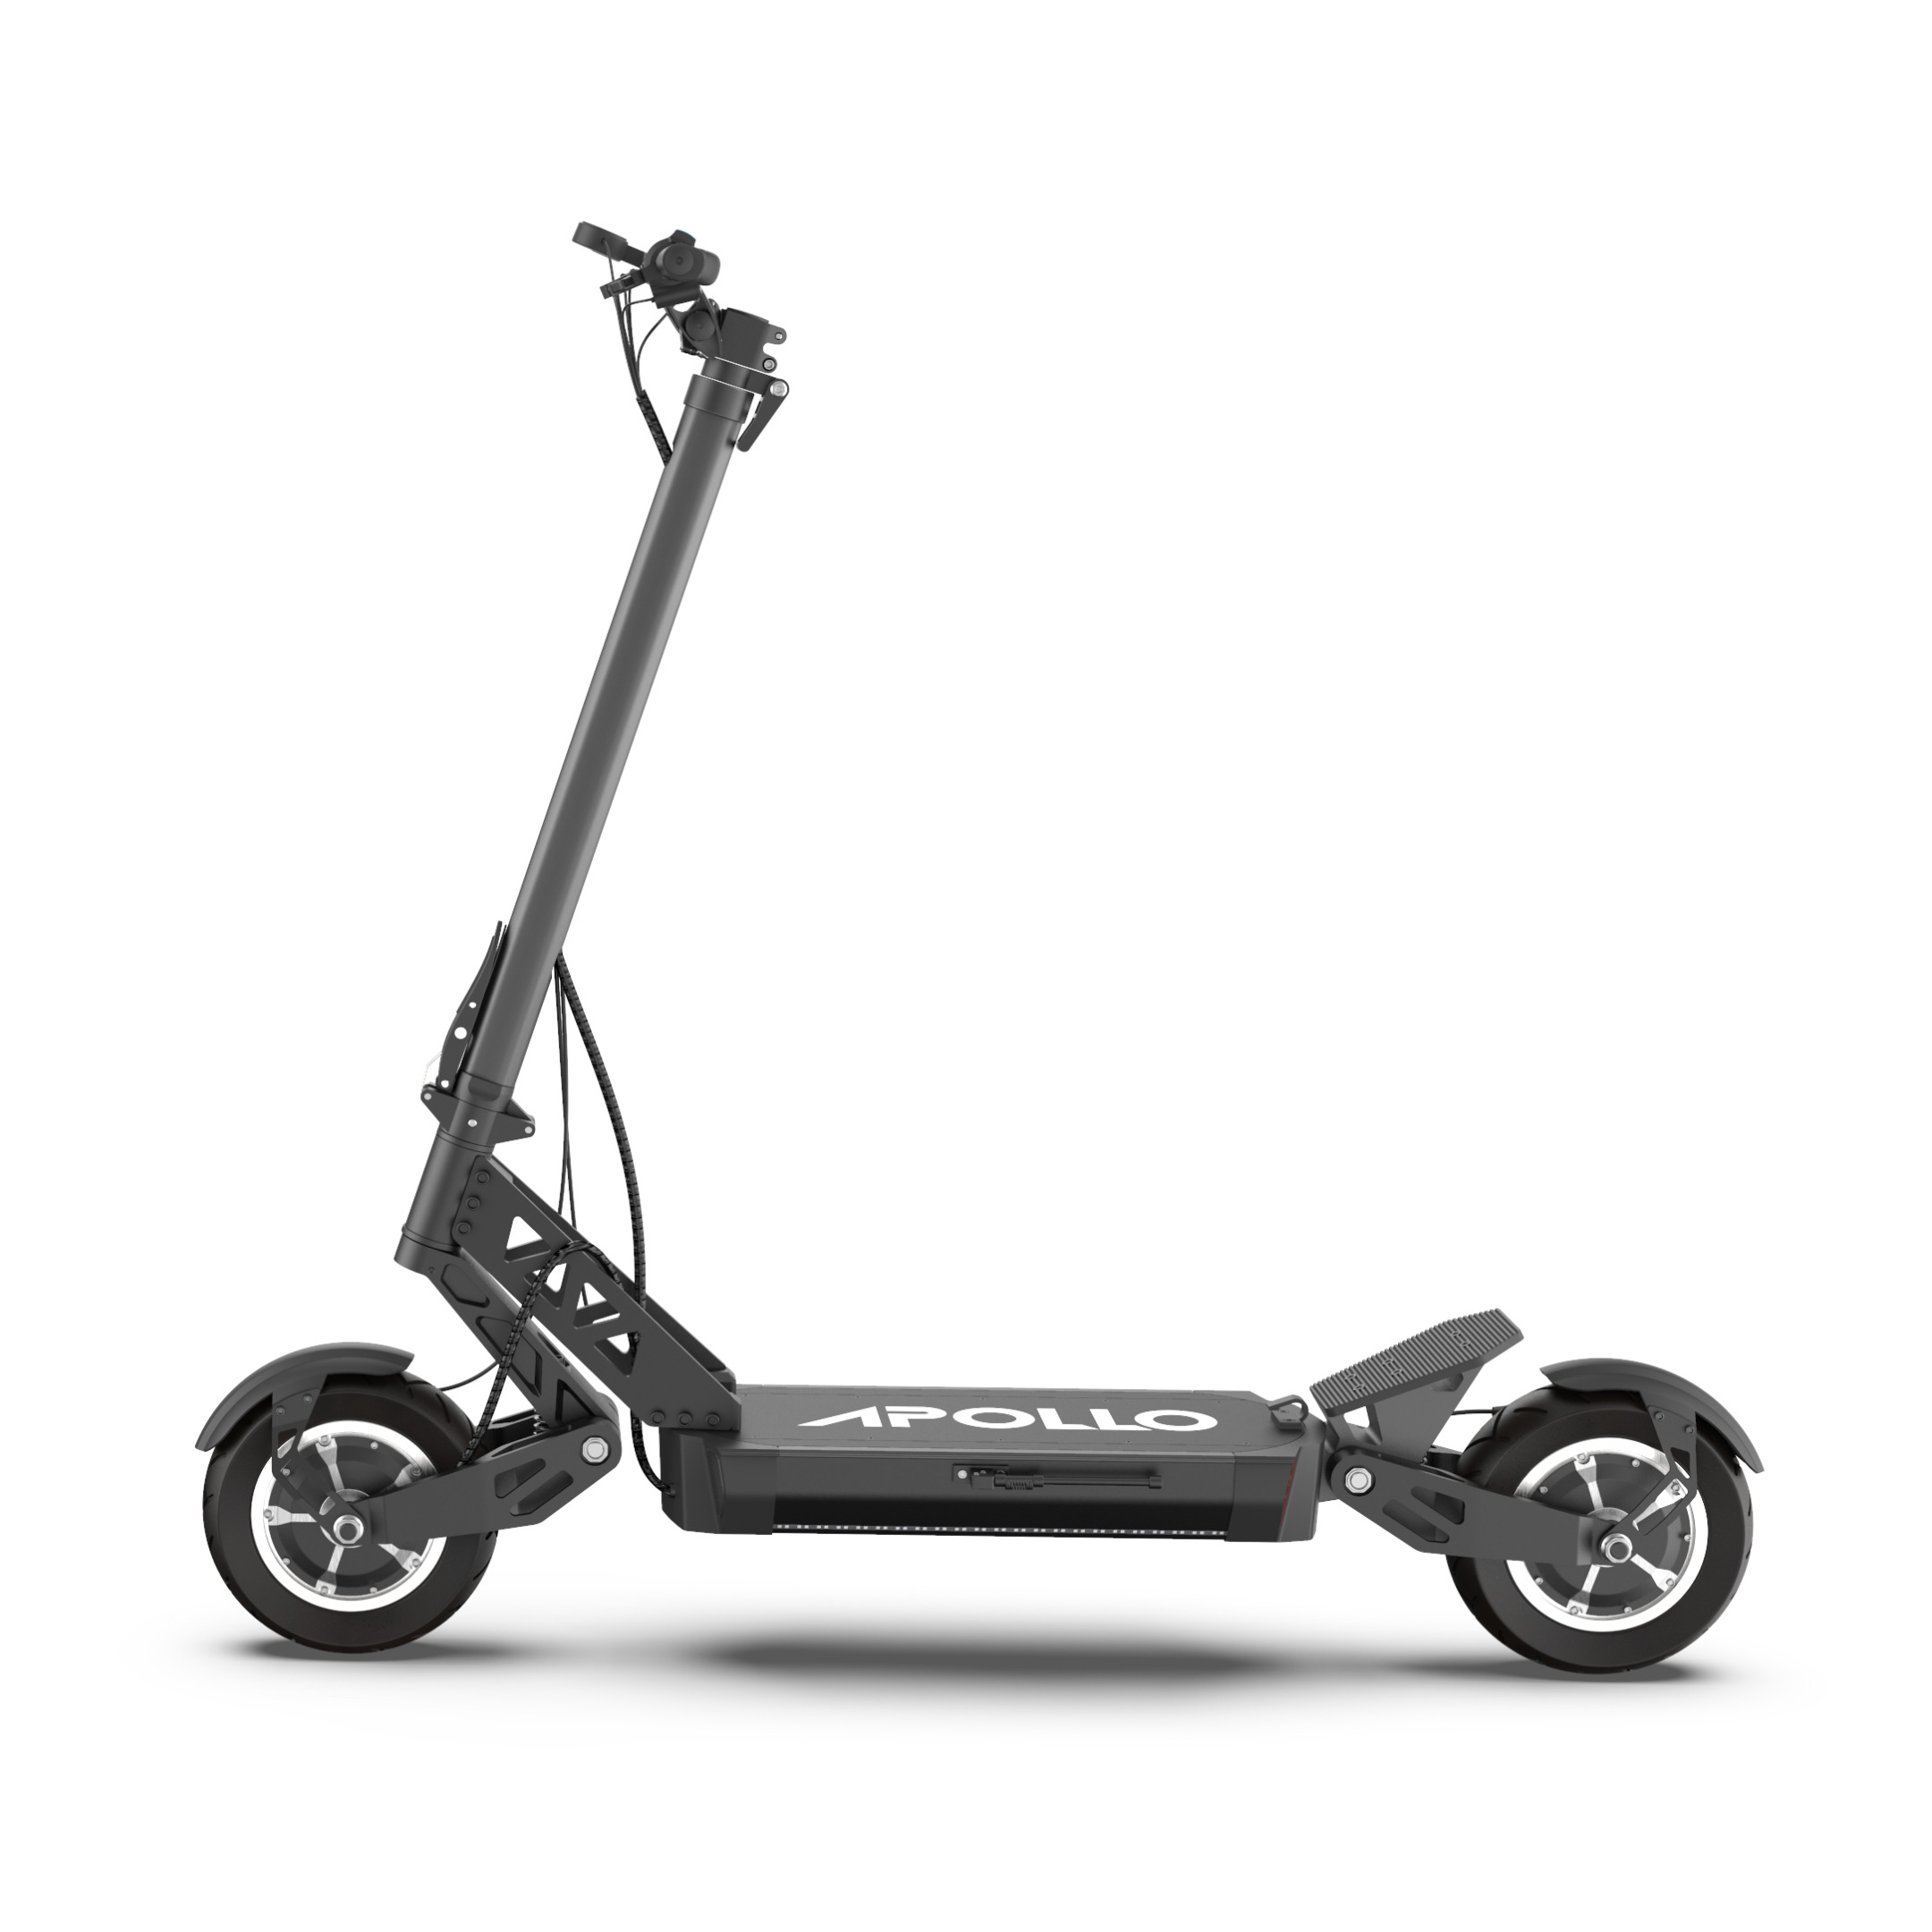 Dualtron Victor, All-around e-scooter for rough and paved roads